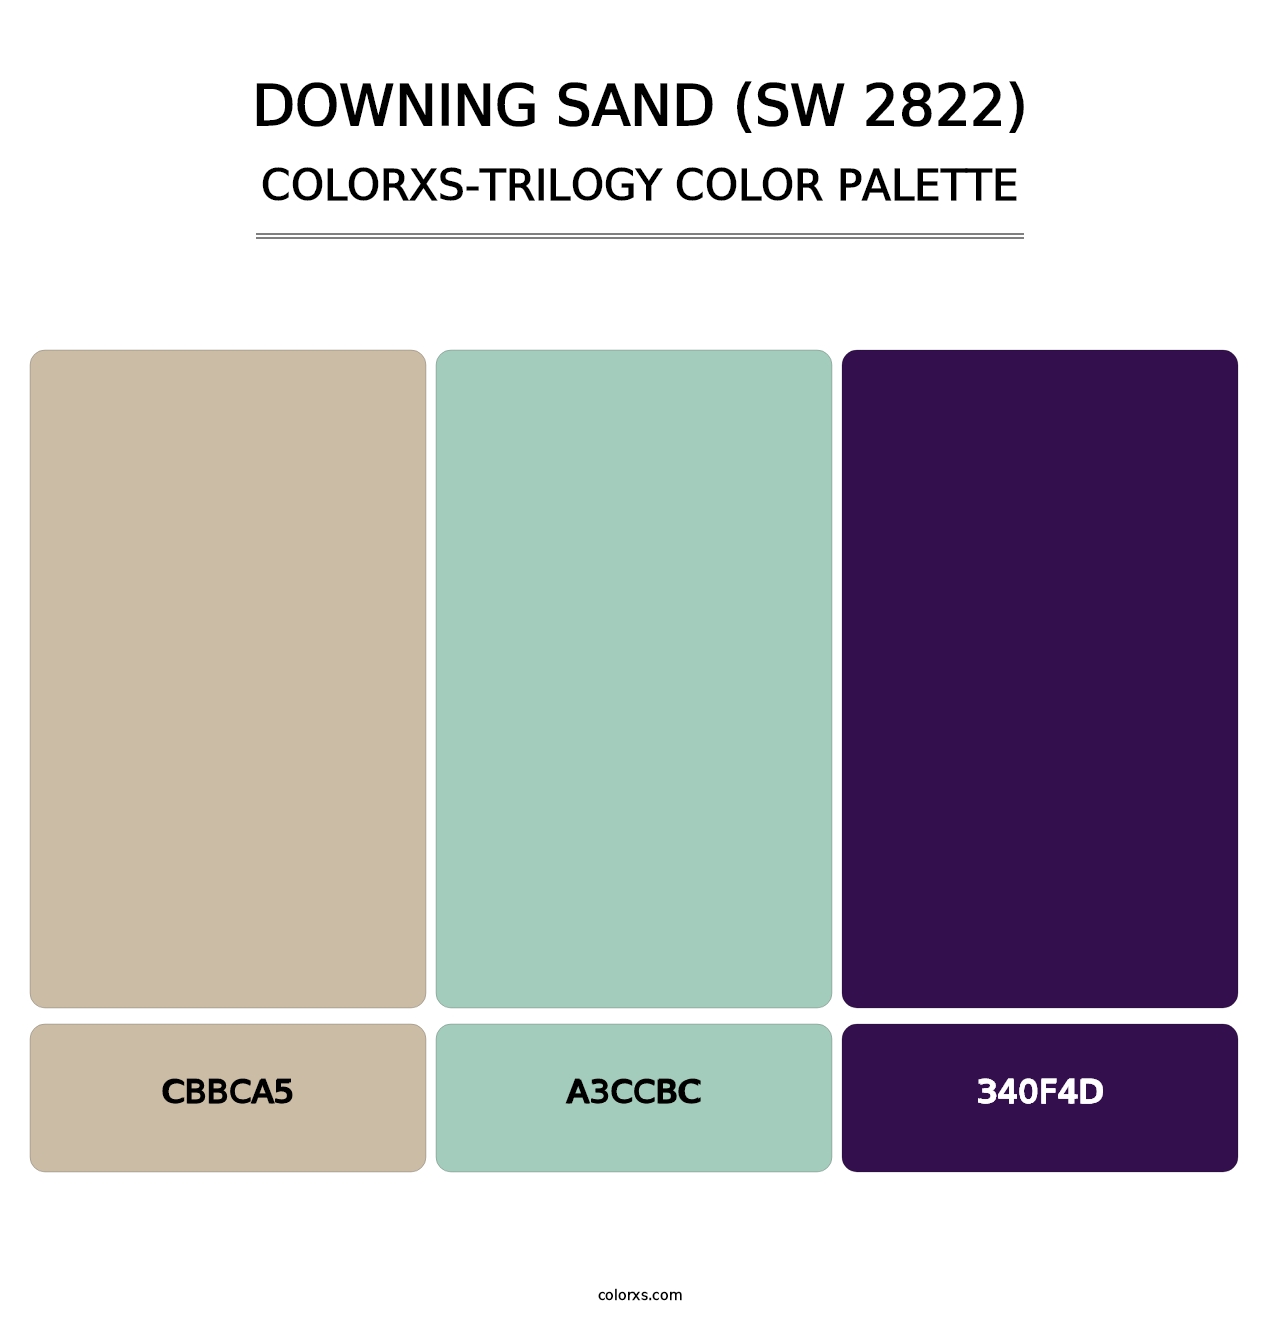 Downing Sand (SW 2822) - Colorxs Trilogy Palette